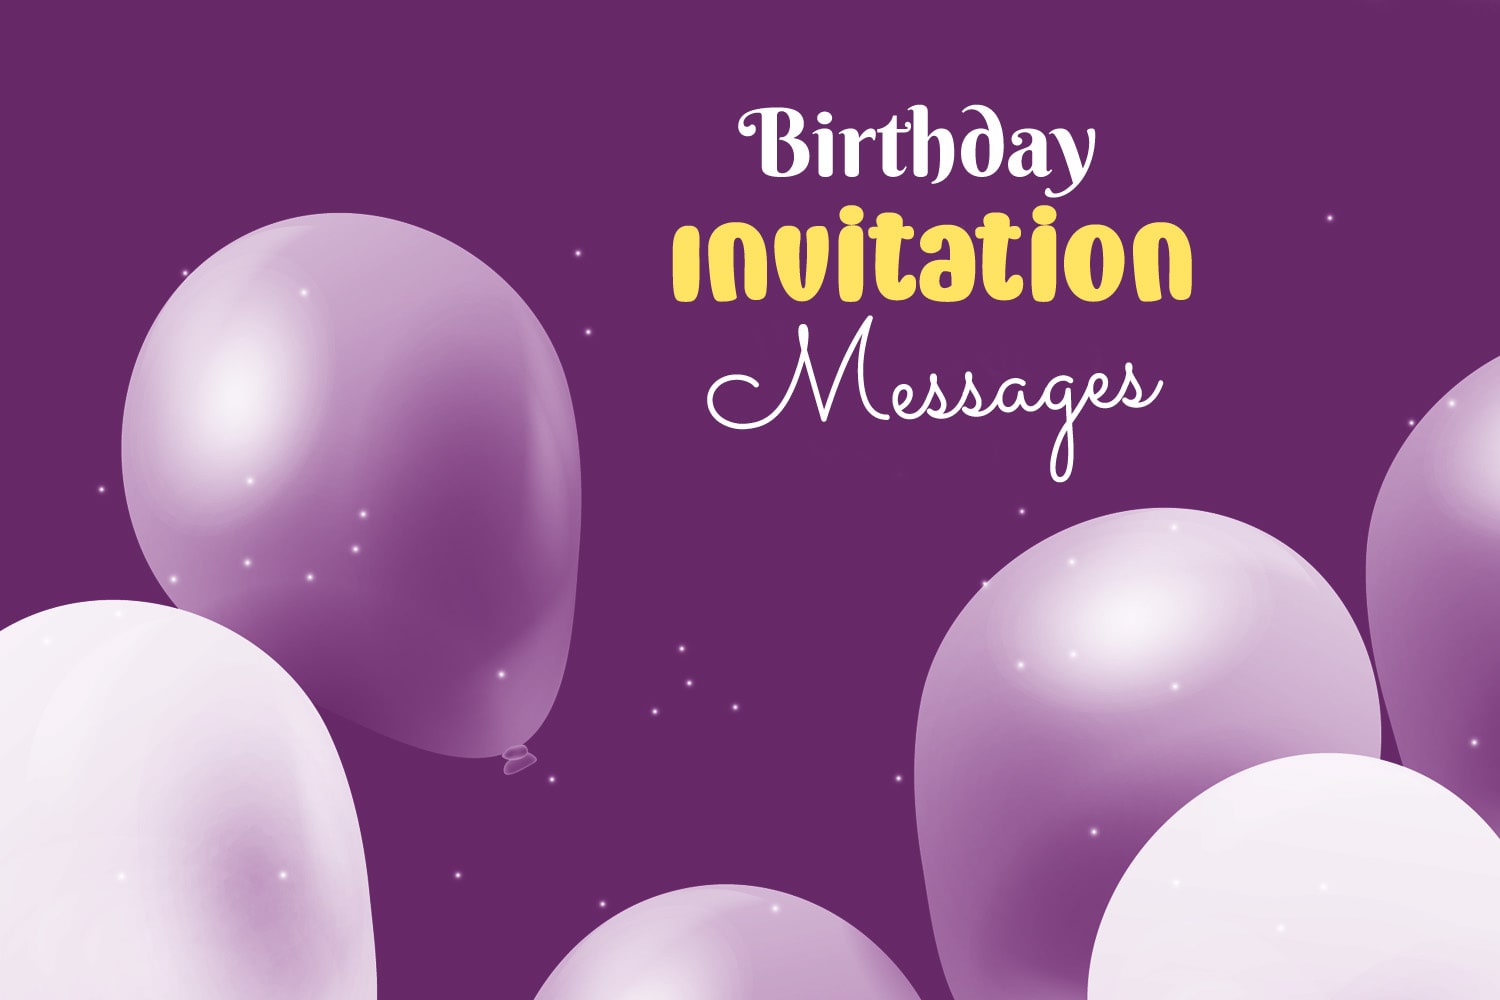 Birthday Invitation Messages and Party Wording Ideas